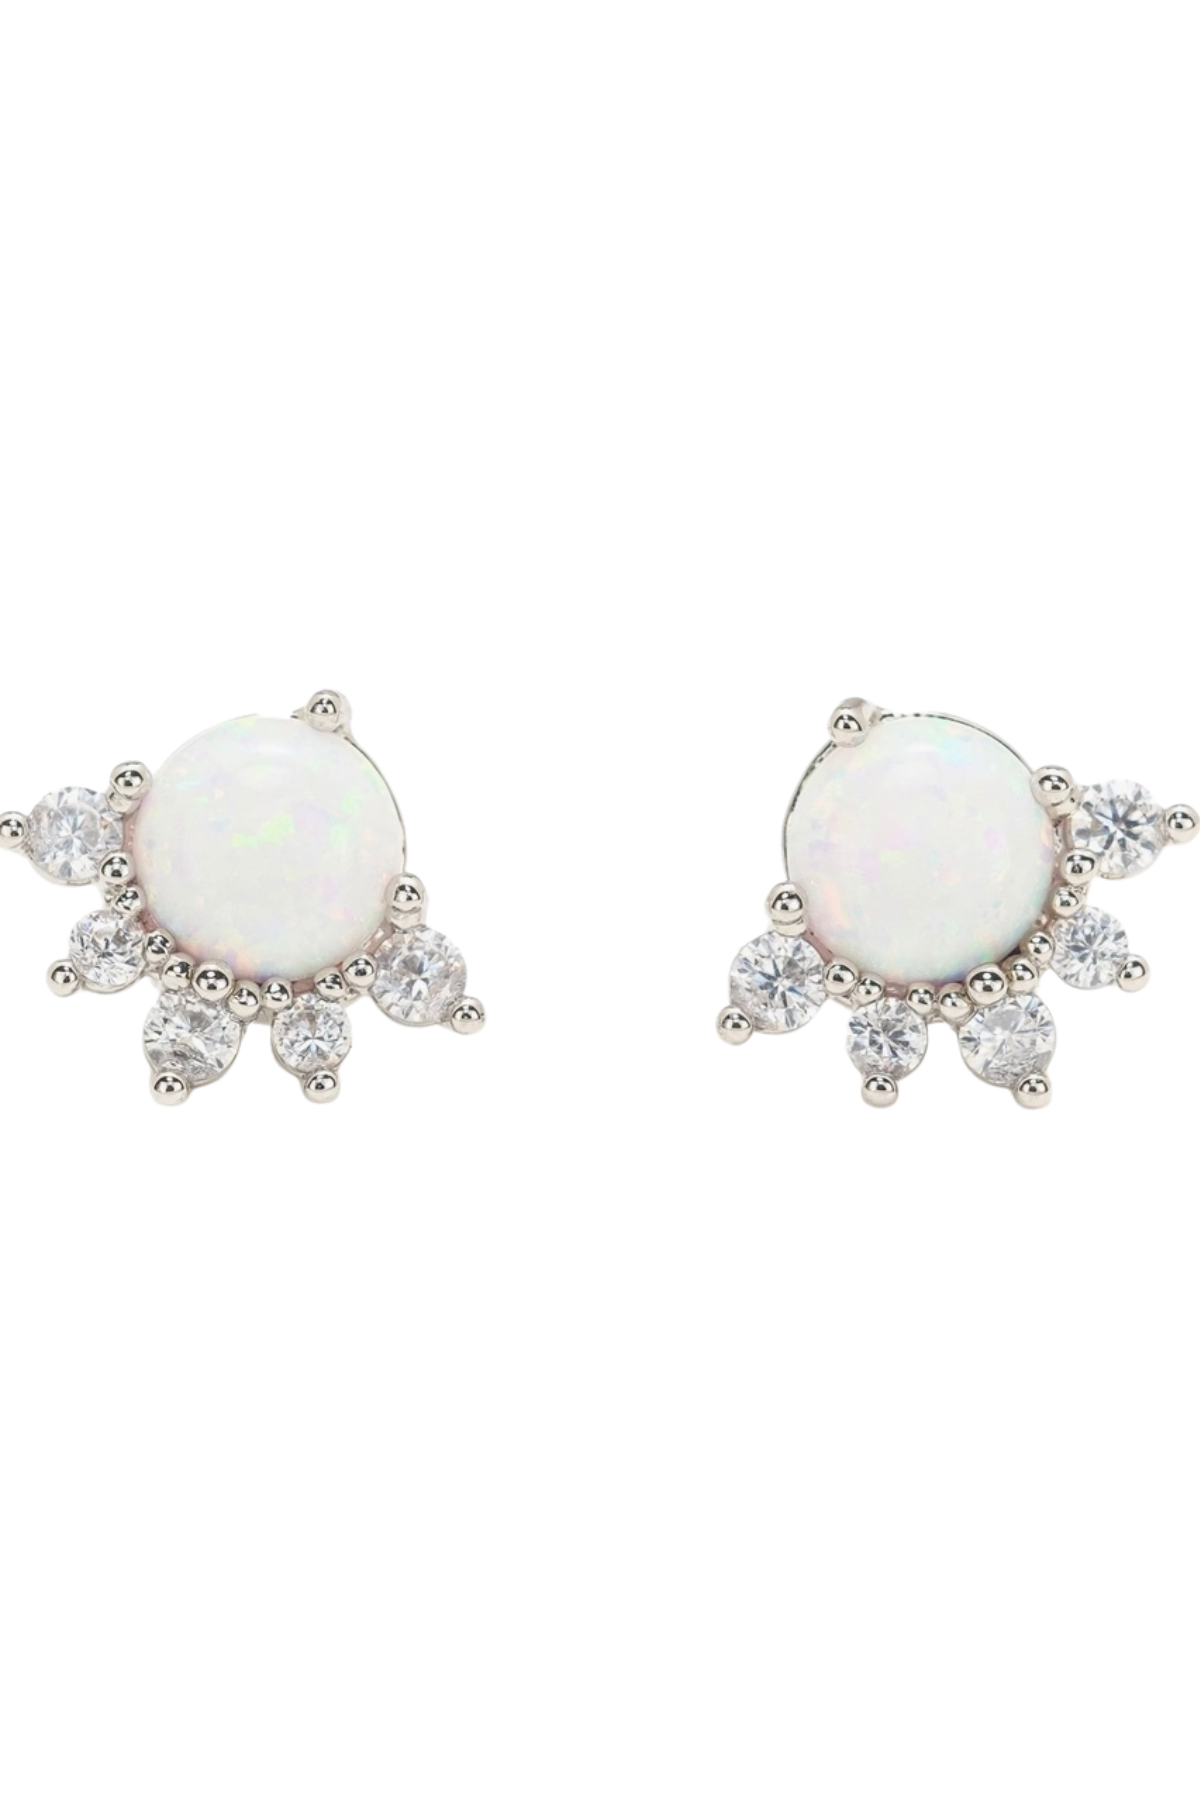 Juno Stud Earrings by Lover's Tempo in a Simulated Opal with 5 Cubic Zirconia stones